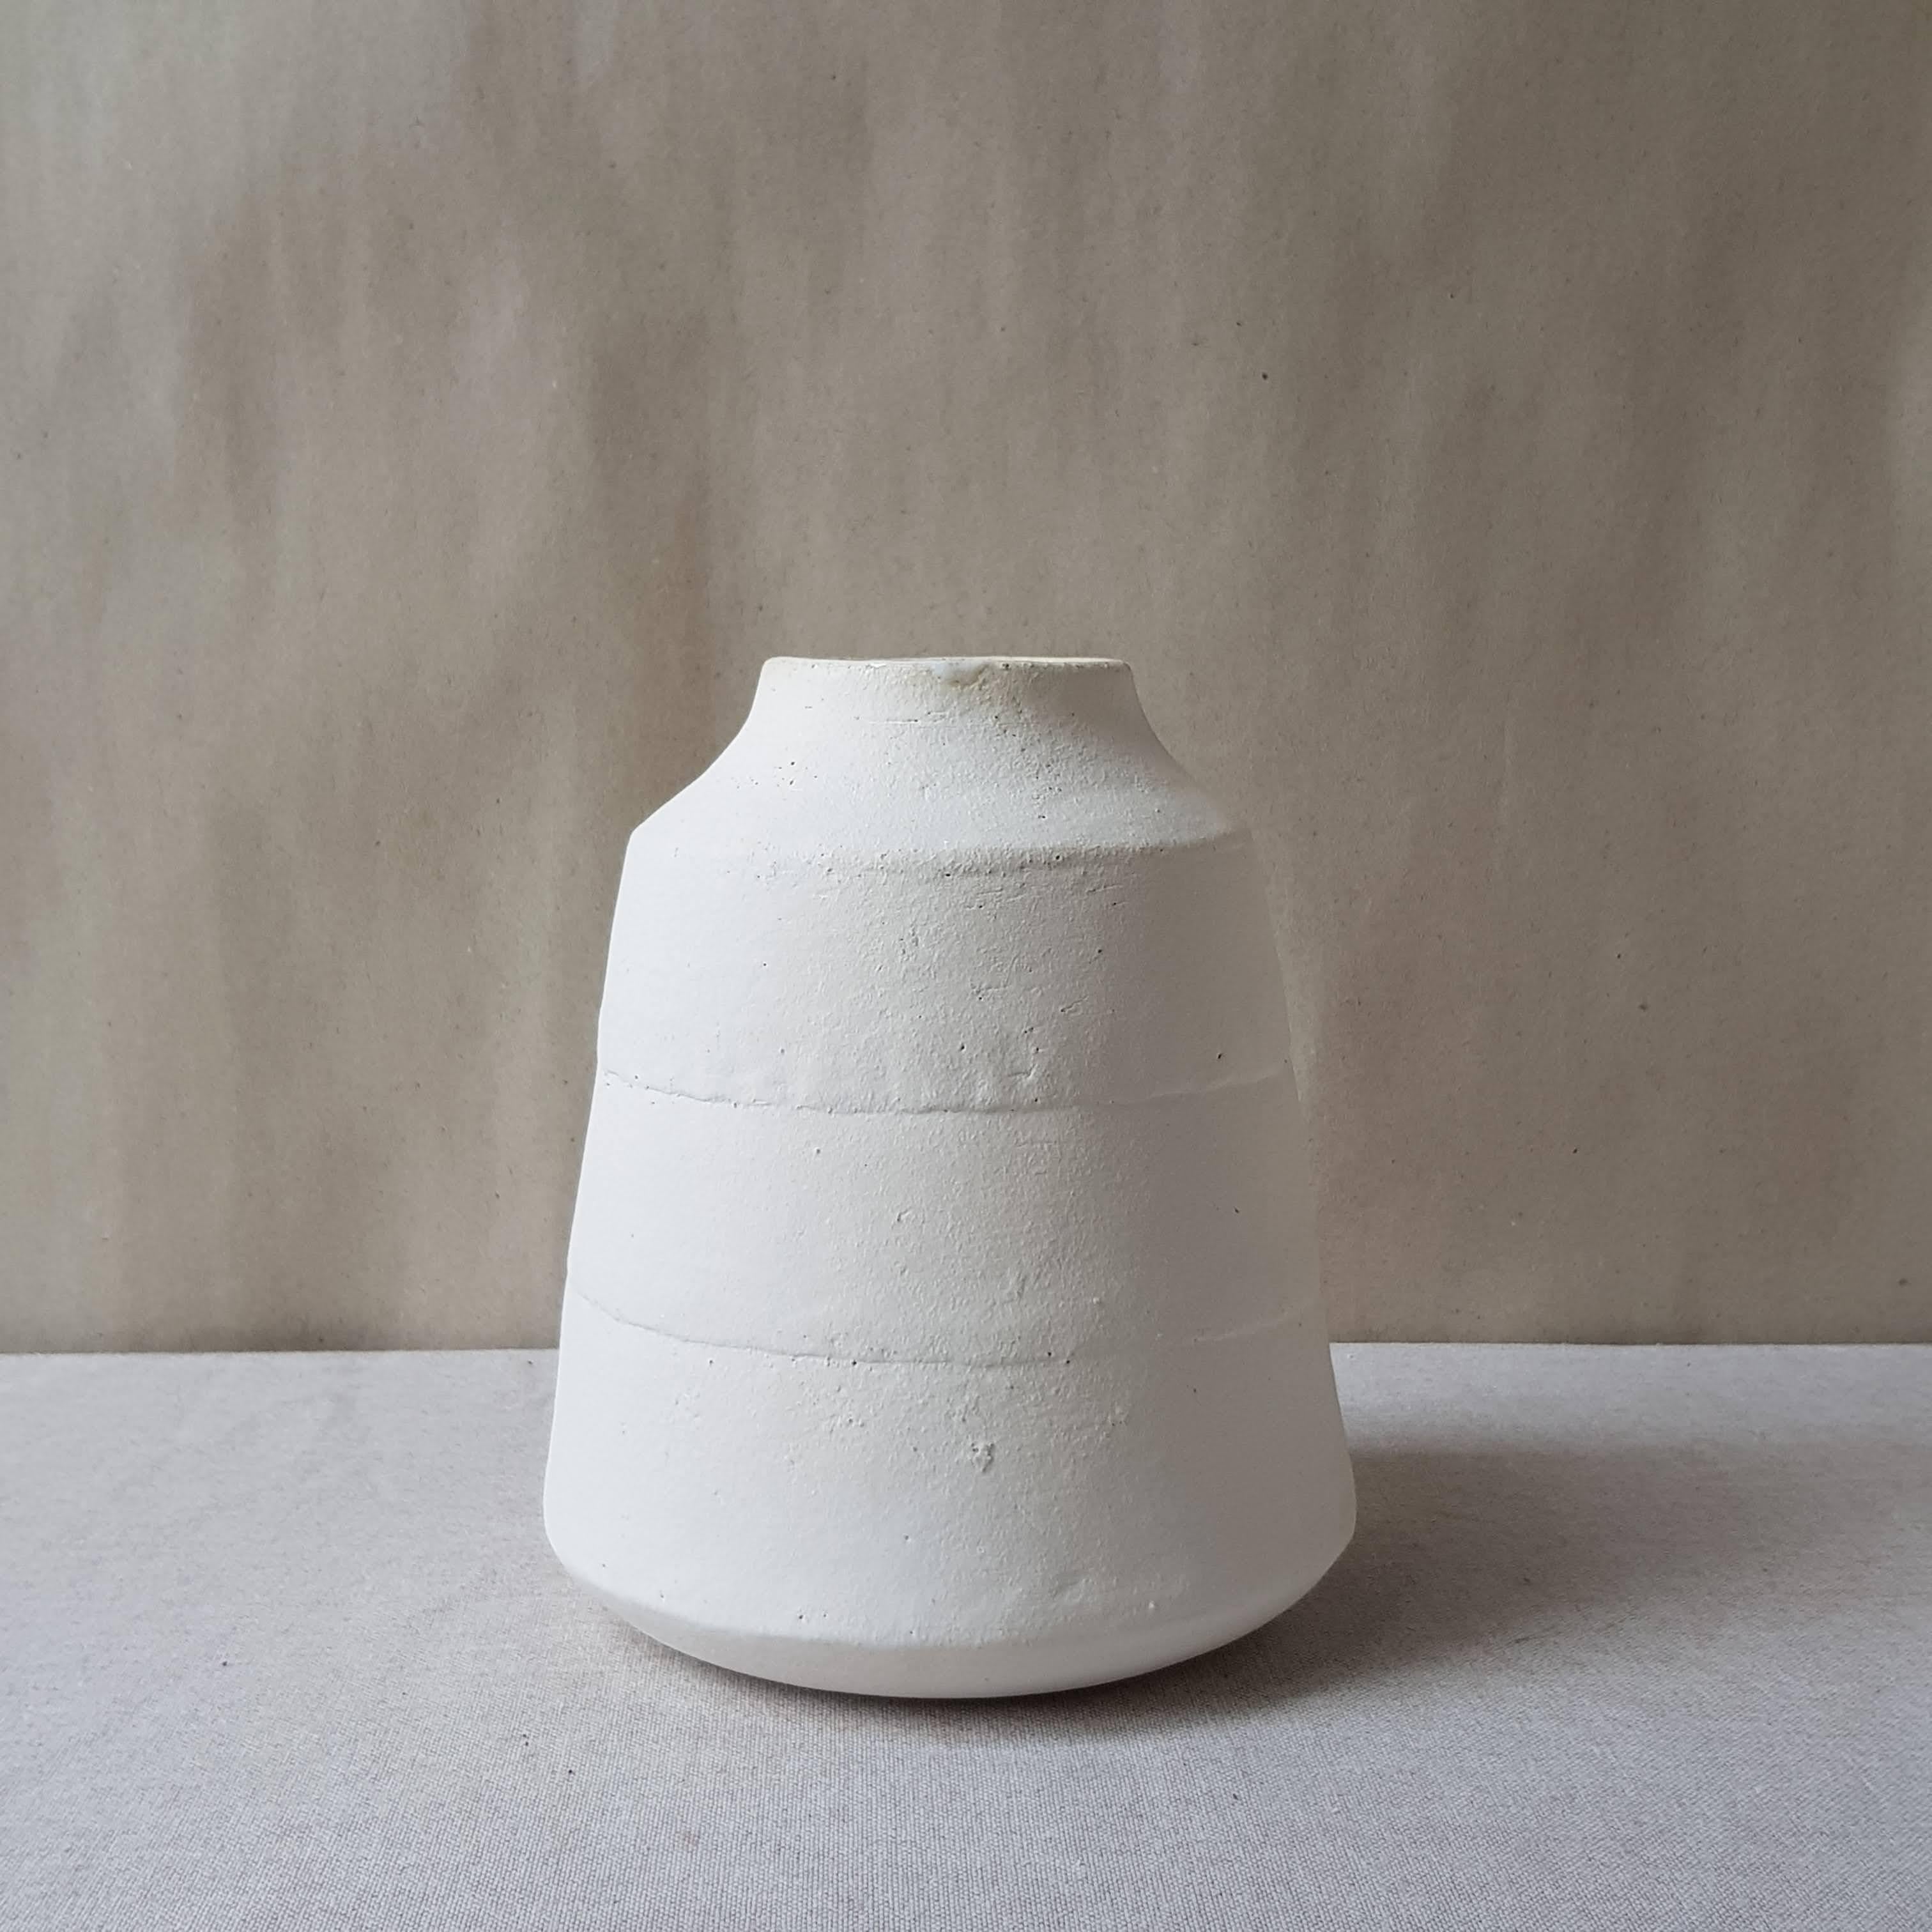 White Stoneware Kados Vase by Elena Vasilantonaki
Unique
Dimensions: ⌀ 30 x H 25 cm (Dimensions may vary)
Materials: Stoneware
Available finishes: Black, White, Grey, Brown, Red, White Patina

Growing up in Greece I was surrounded by pottery forms